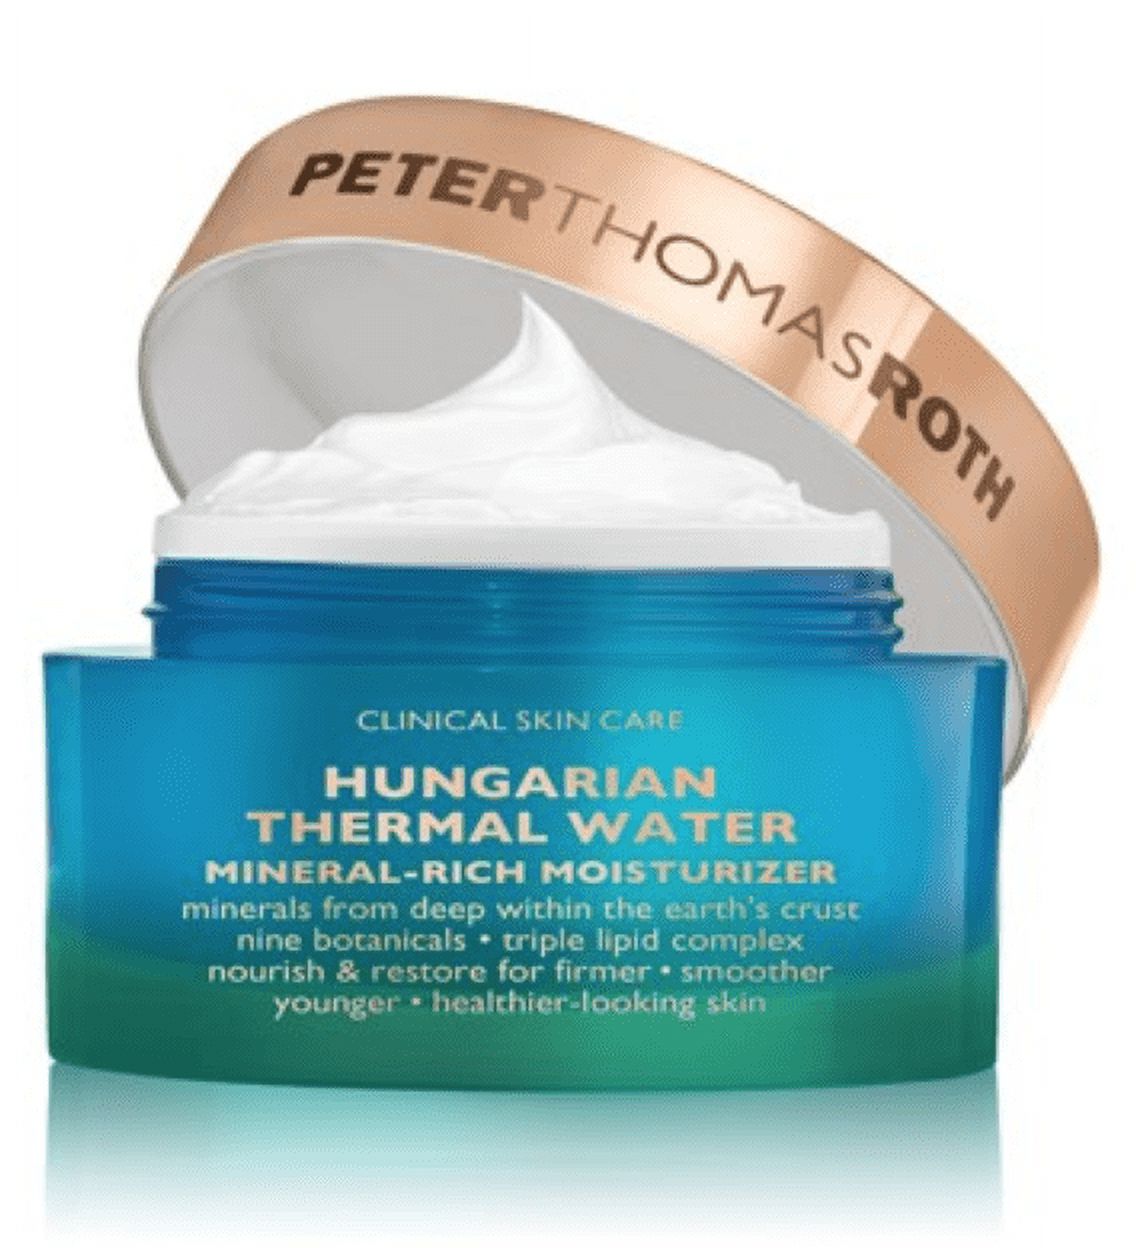 Peter Thomas Roth Hungarian Thermal Water Mineral Rich Moisturizer 1.7 Oz - image 1 of 2